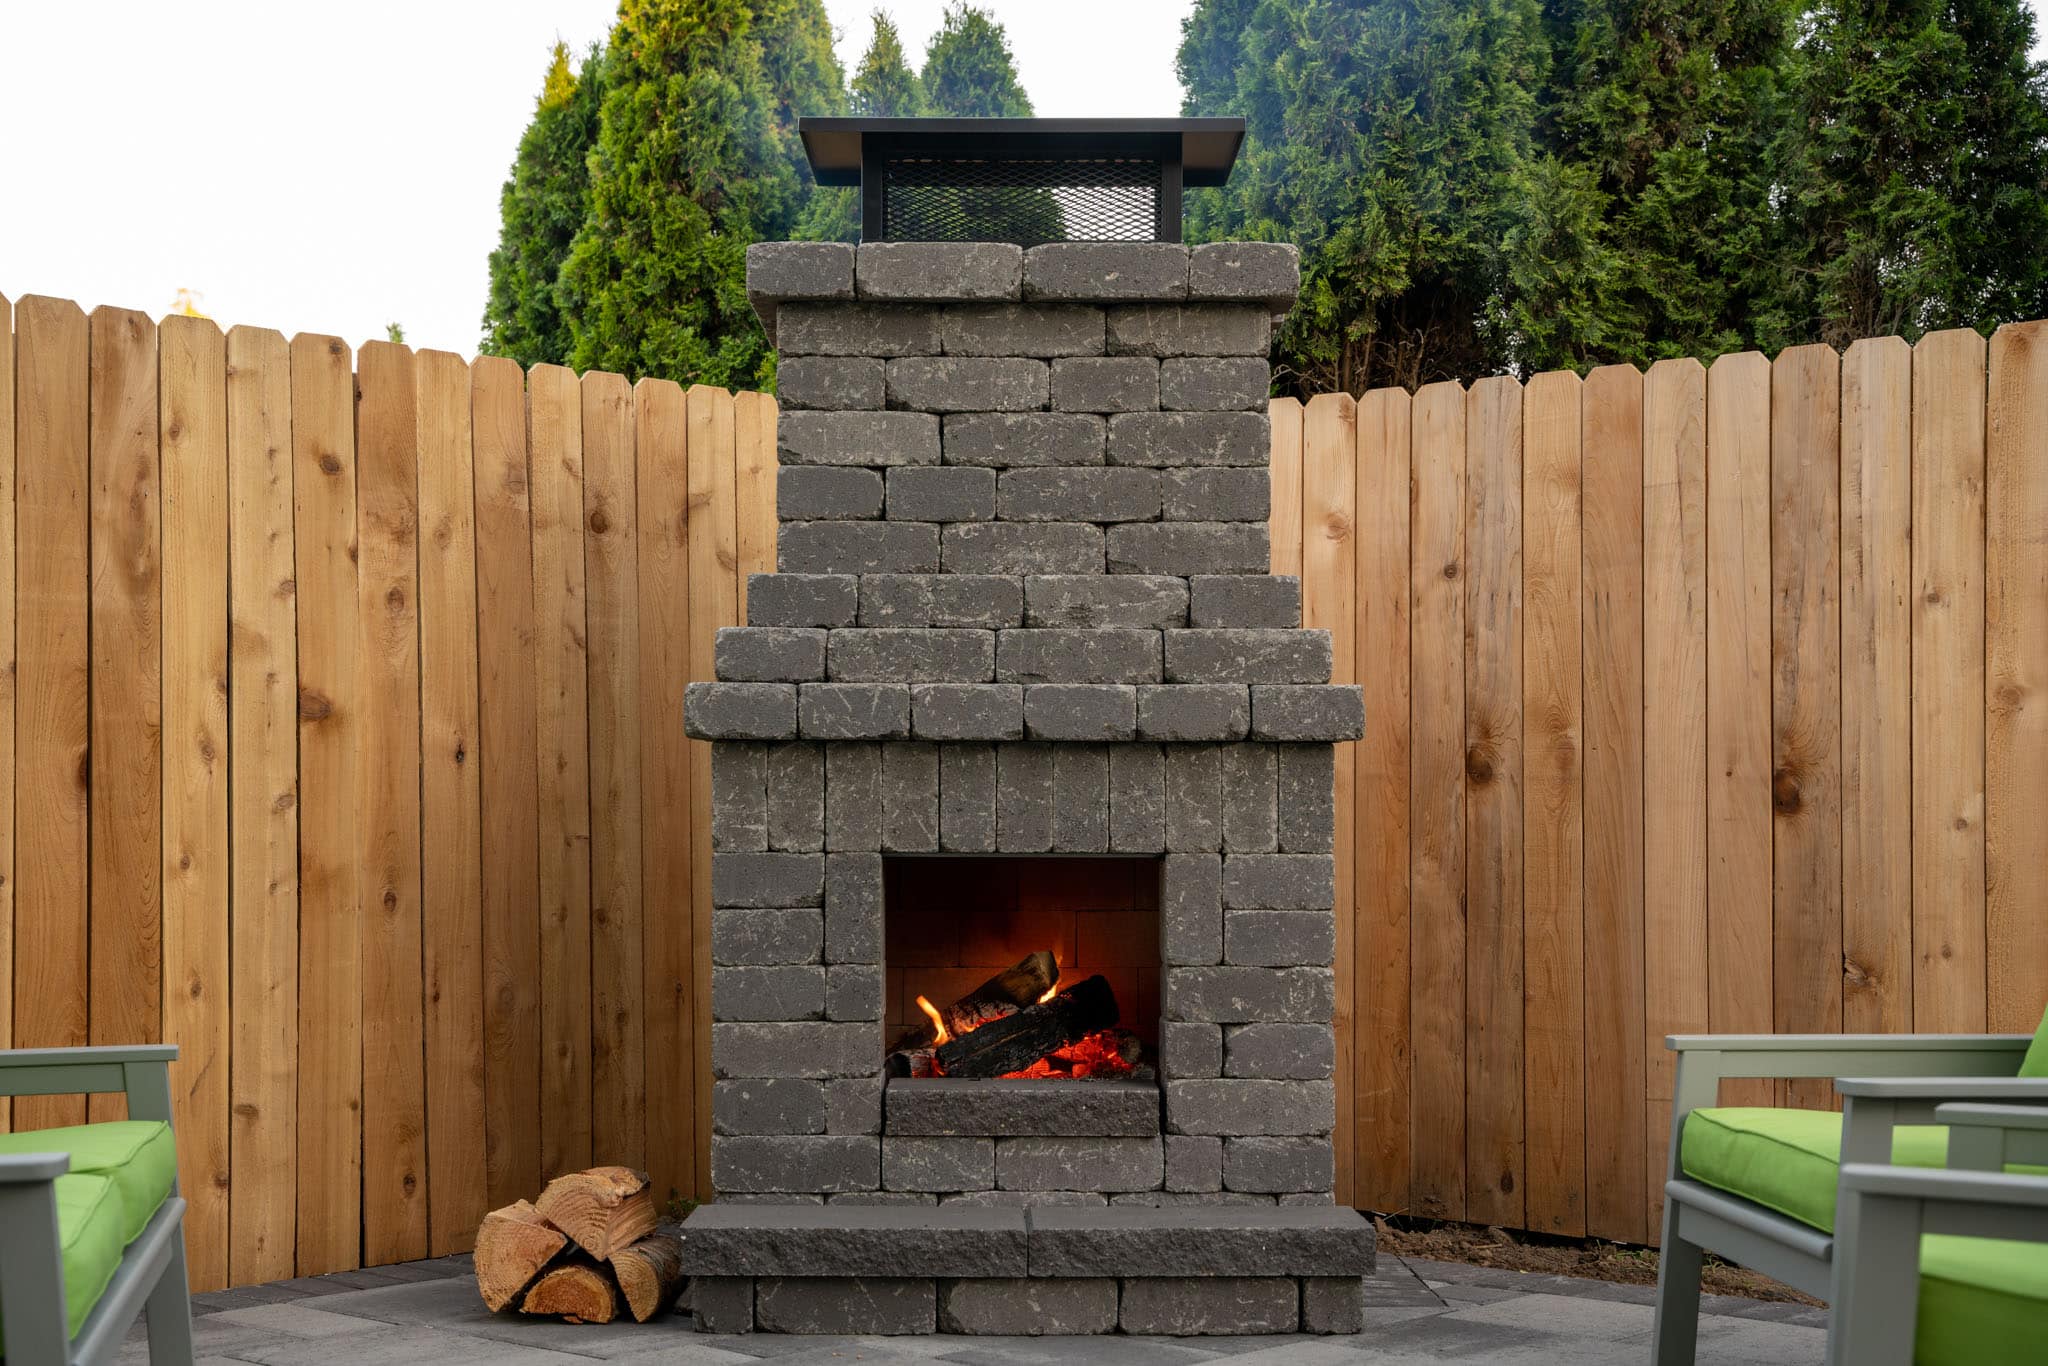 How to Install Firebrick in Your Outdoor Stone Fireplace